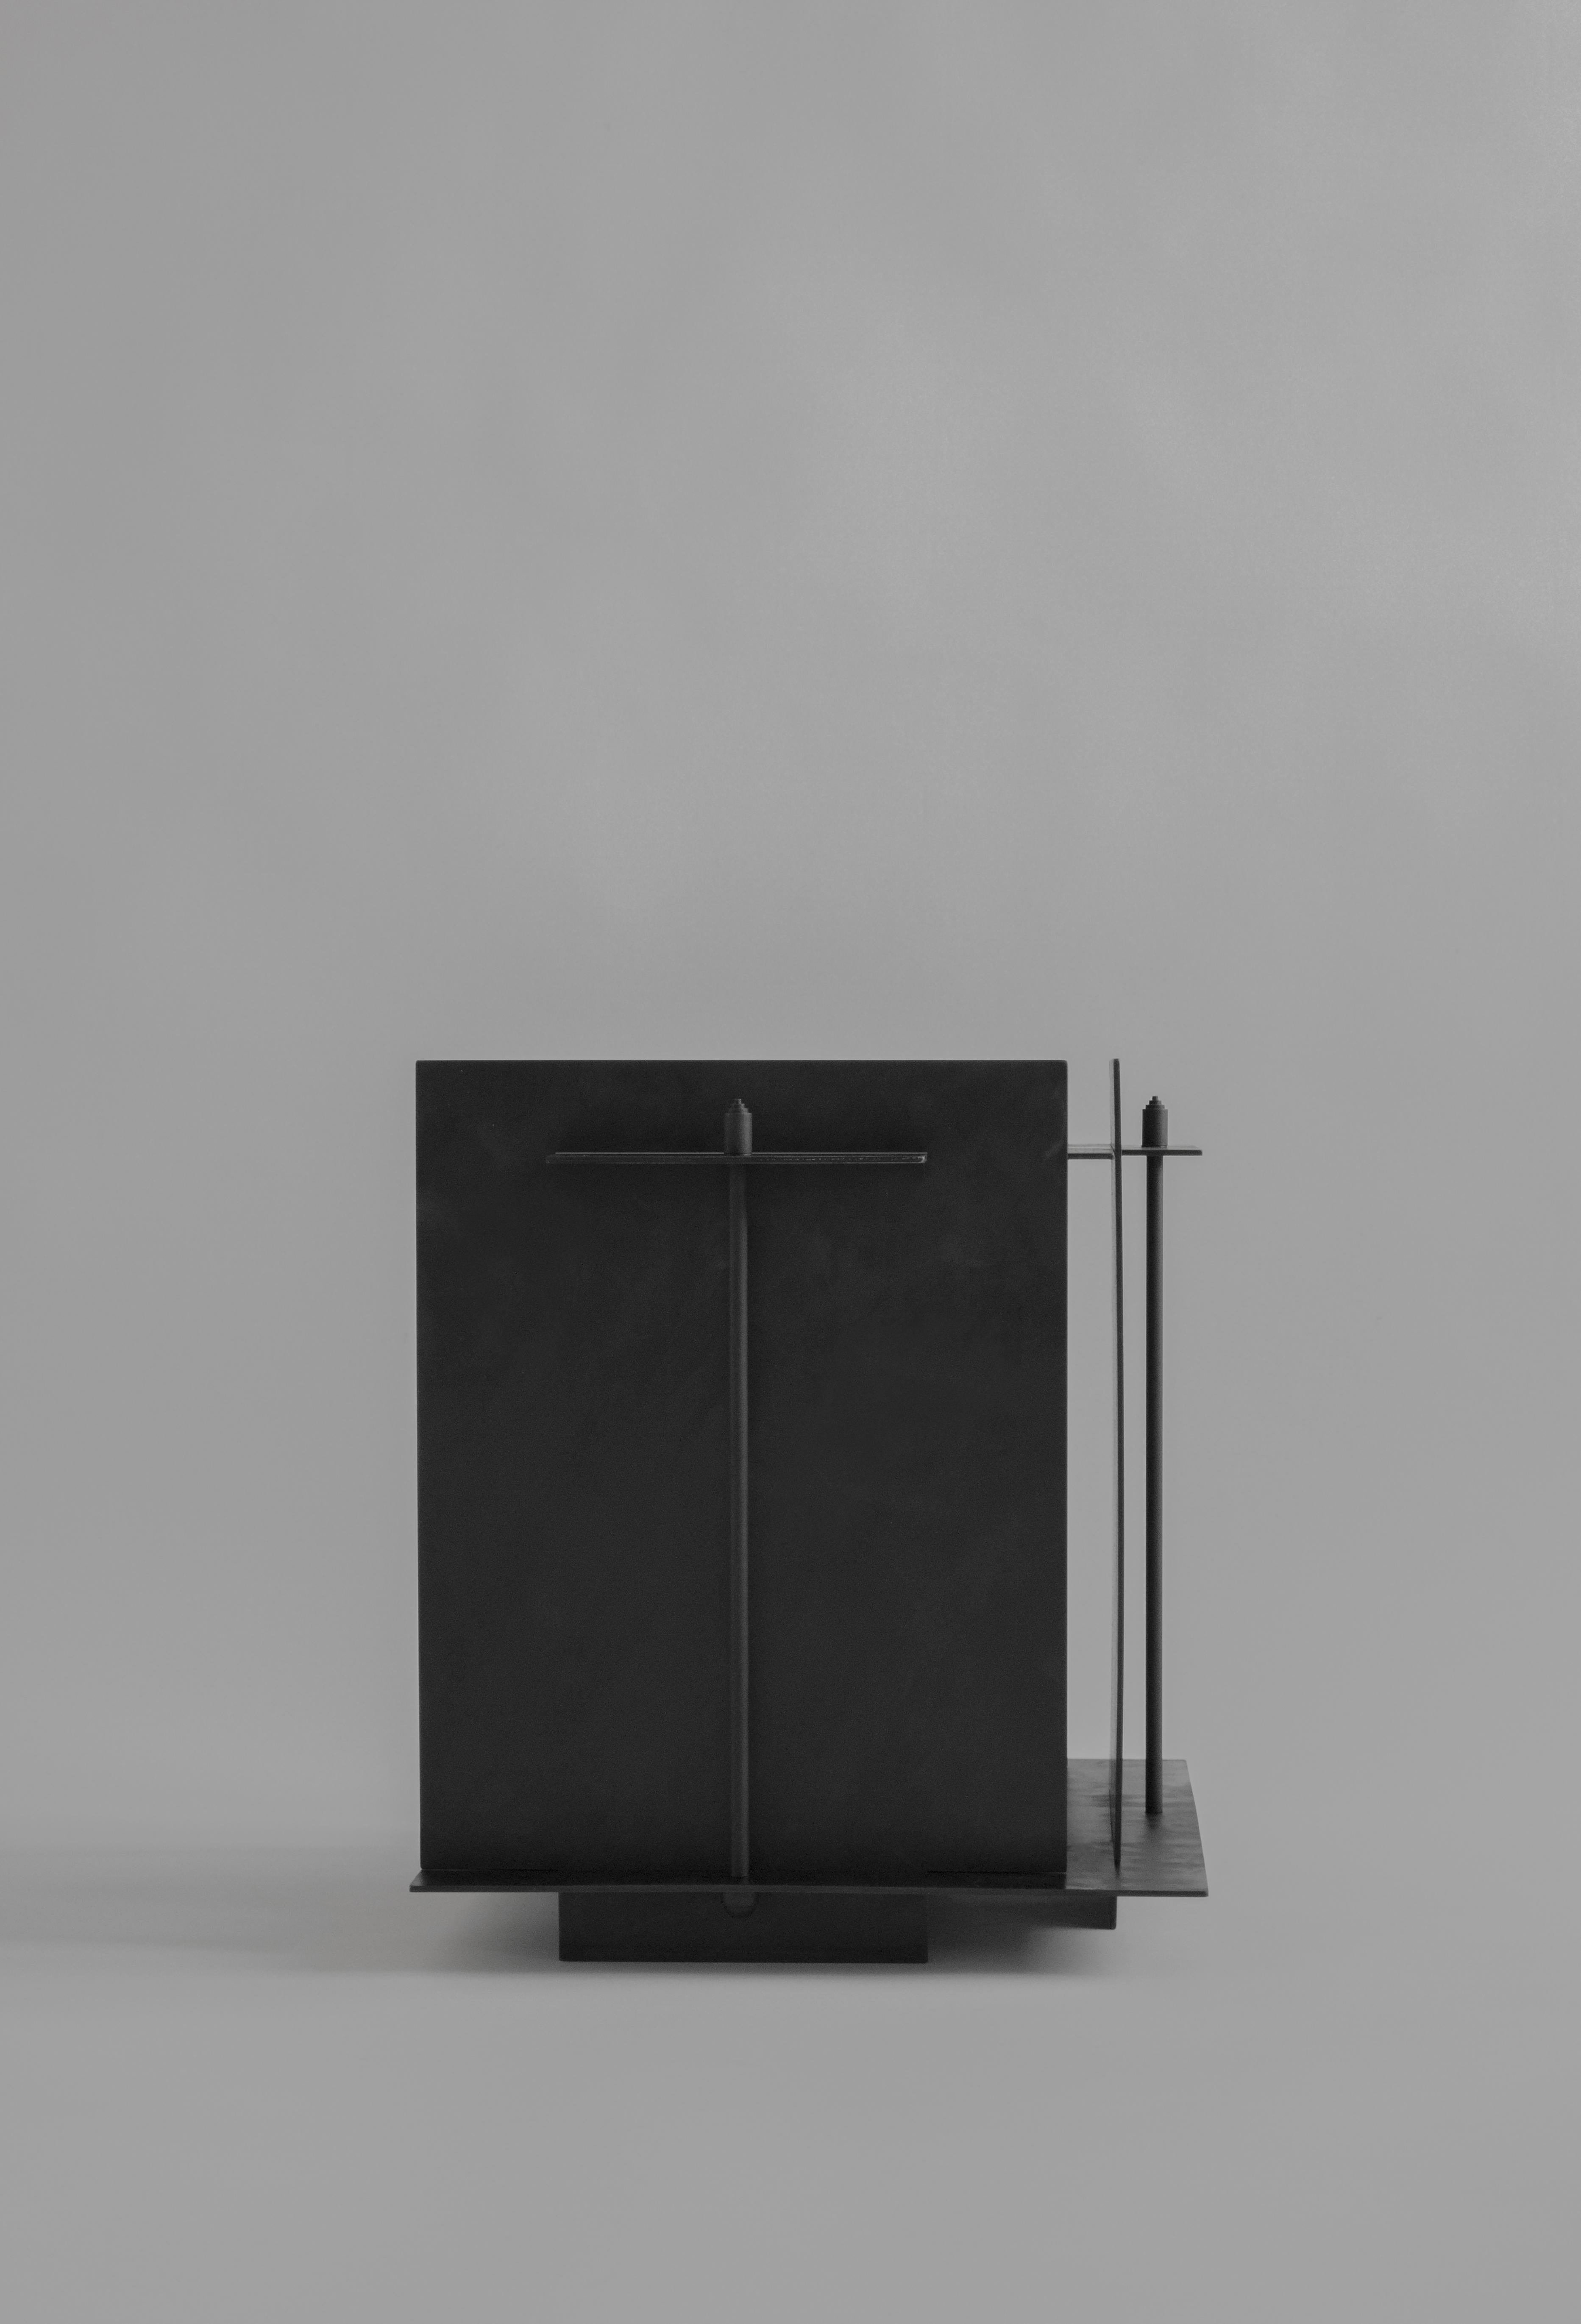 Pilier side table by Sizar Alexis
Signed and Numered
Edition of 12
Dimensions: Length 40 x width 34 x height 39 cm
Materials: Blackened steel
Weight: ~ 15kg  

A series of boldly sculpted furnitures and objects, an
appreciation of the raw